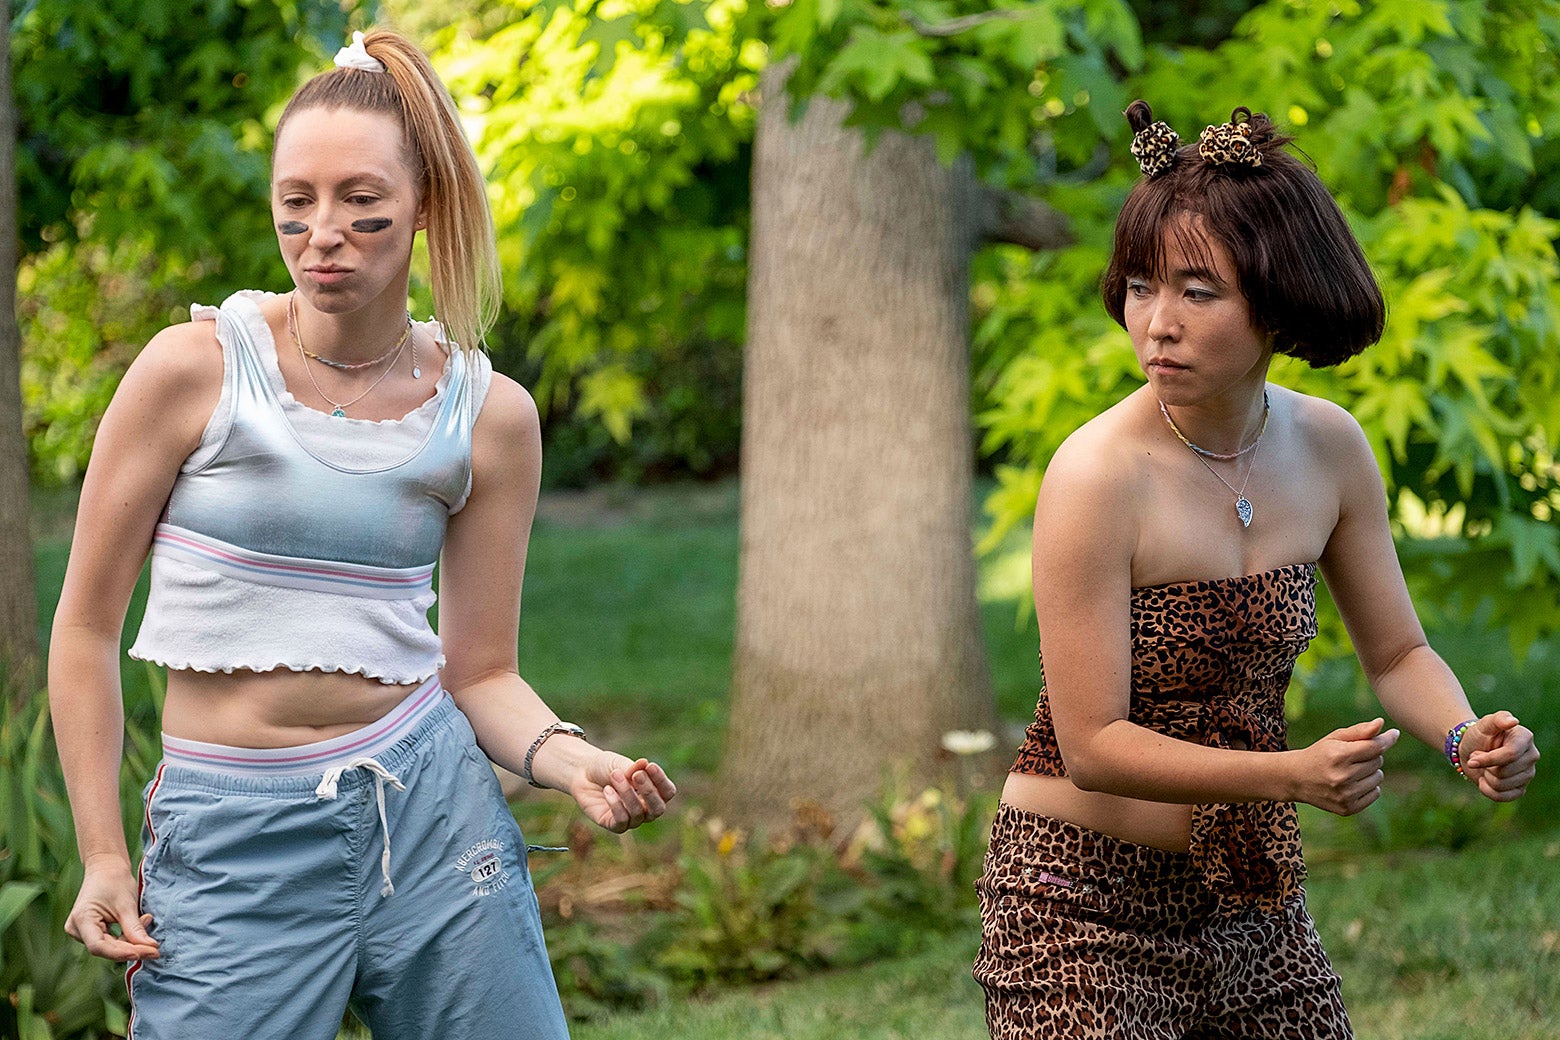 Anna Konkle and Maya Erskine as their younger selves in Pen15, dancing dressed as Spice Girls.